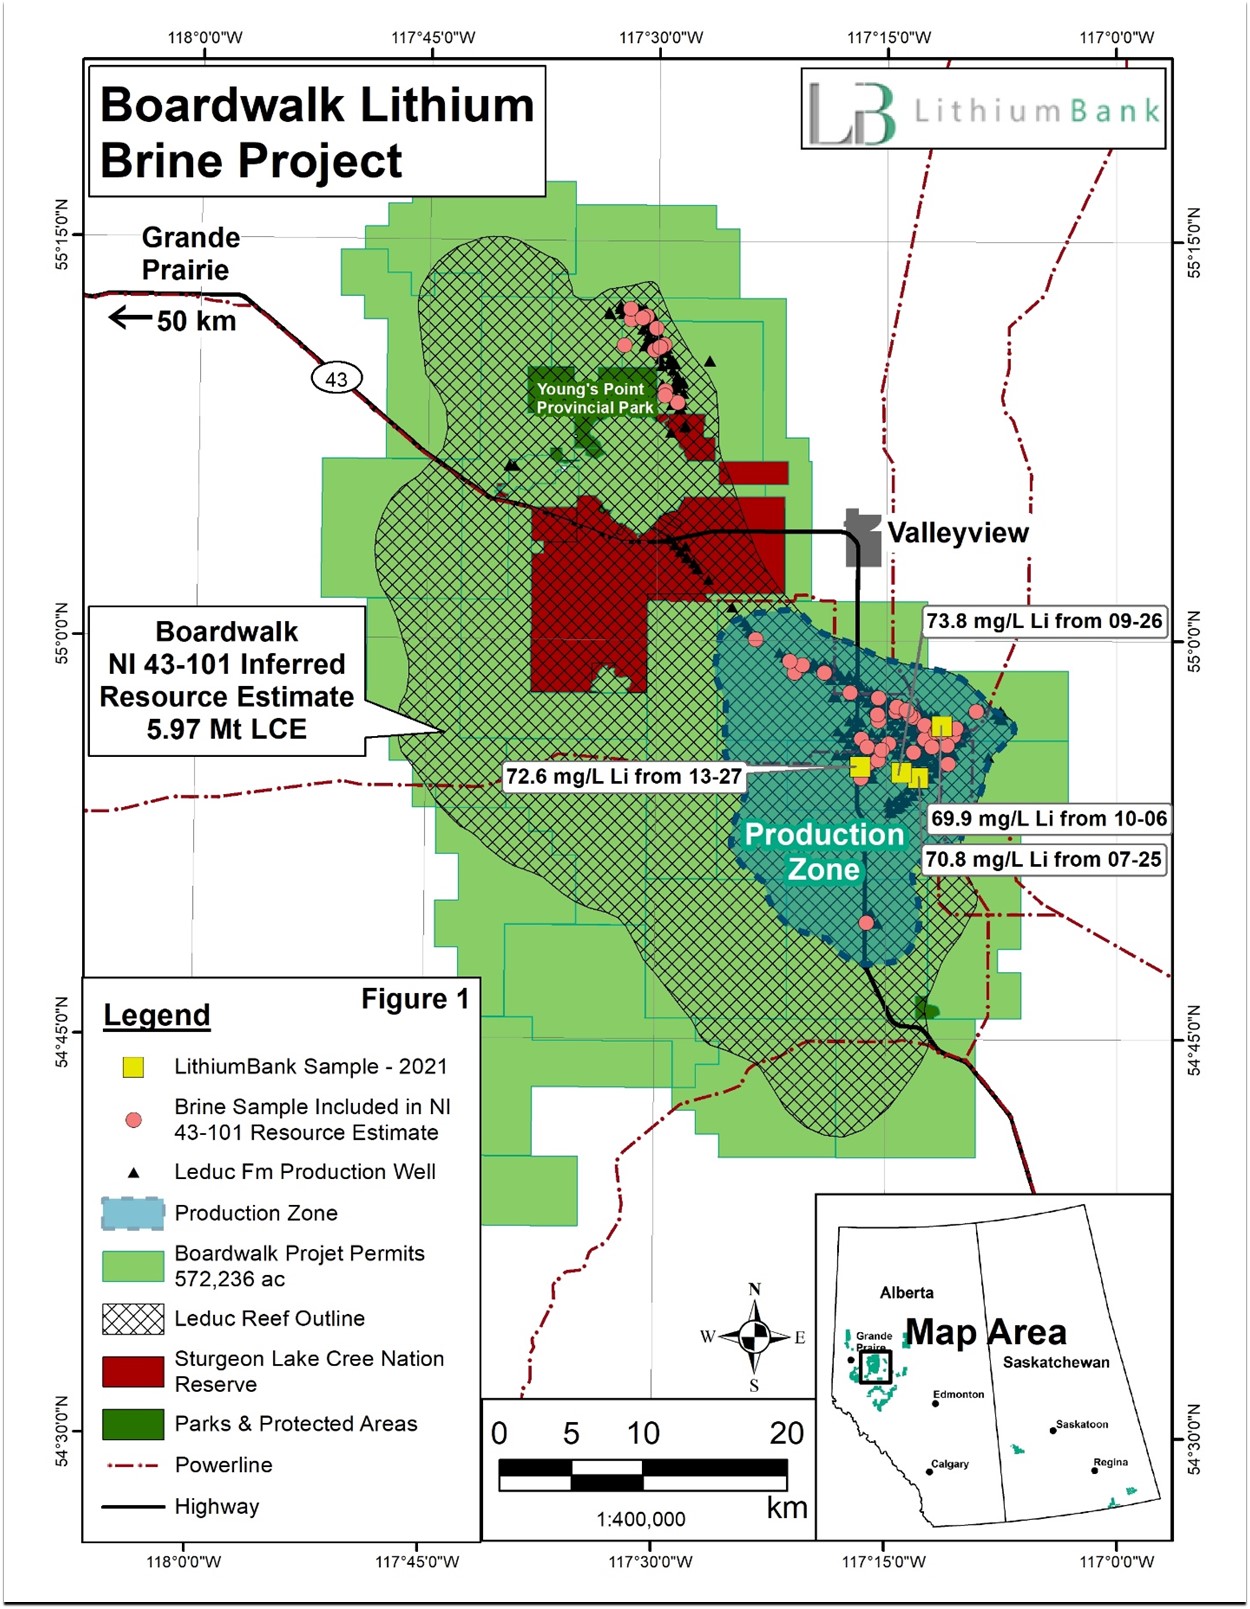 Figure 1. Boardwalk Lithium Brine Project mineral title map highlighting the